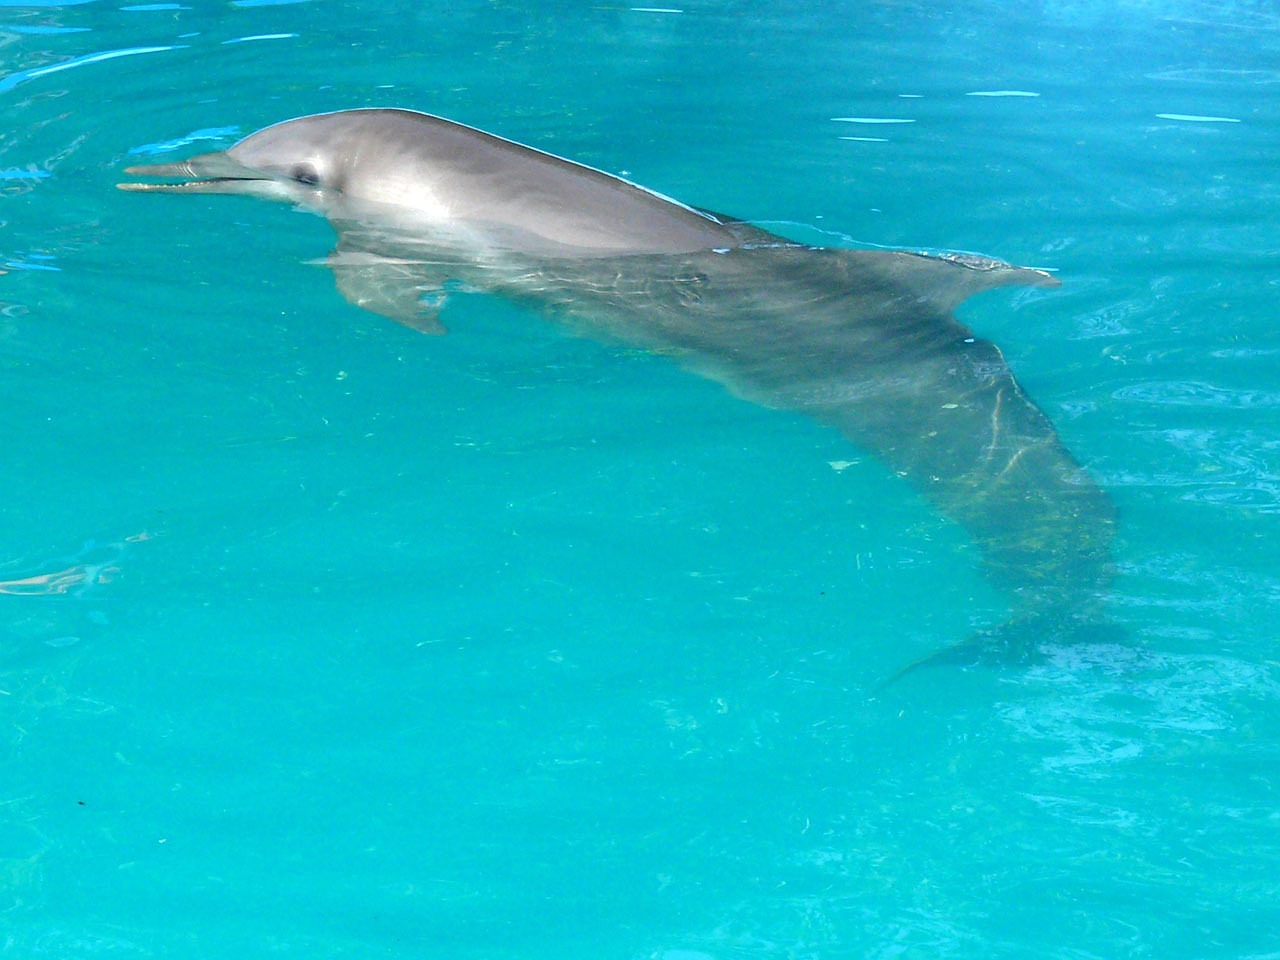 there is a dolphin that is swimming in the water, a photo, by Nancy Spero, bahamas, taken with a pentax1000, picture taken in zoo, very sharp photo